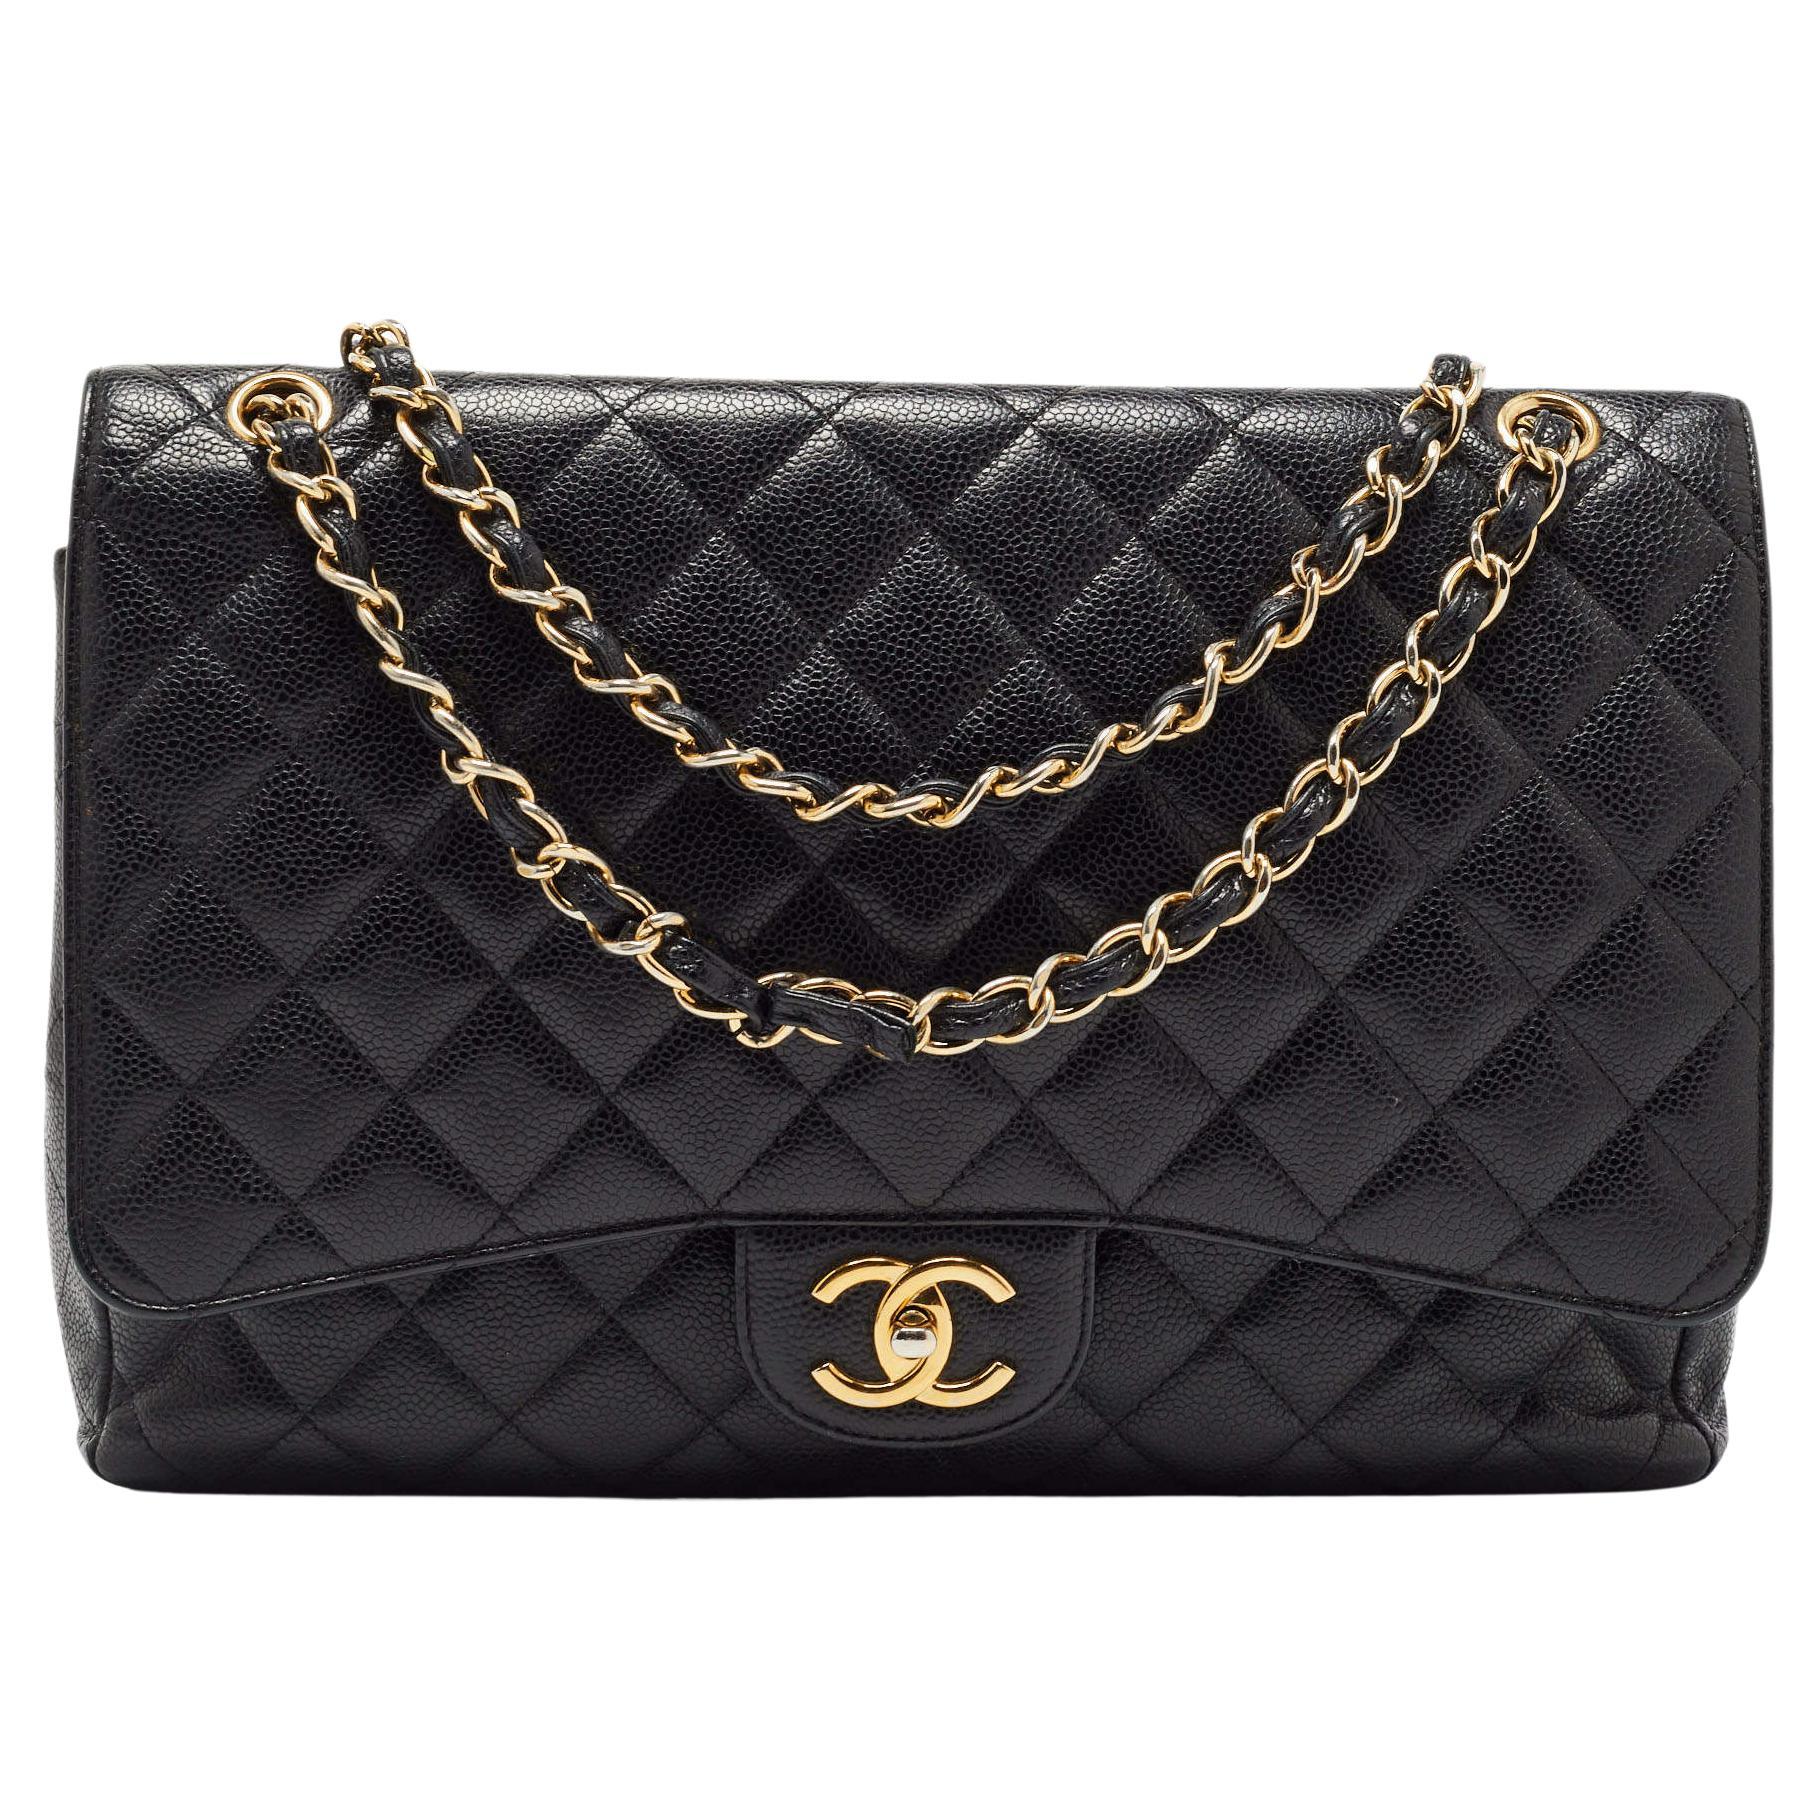 Chanel Beige Quilted Patent Leather Maxi Classic Double Flap Bag